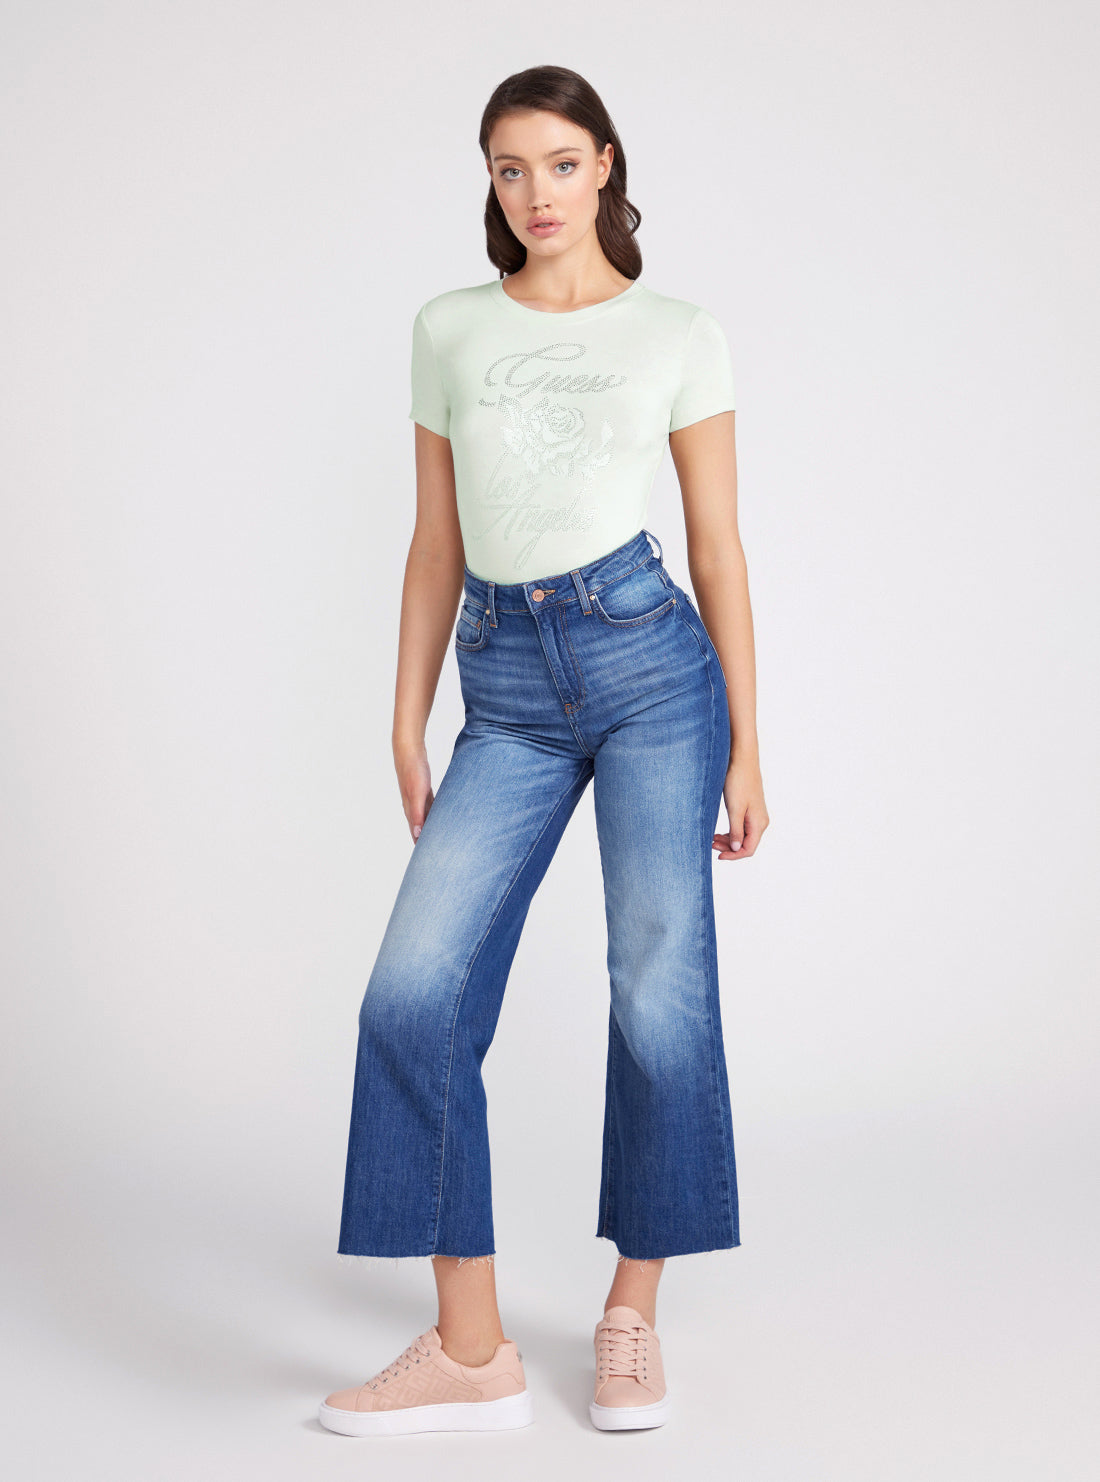 High-Rise Ankle Wide Leg Denim Jeans In Feel Free Wash | GUESS Women's Denim | full view 